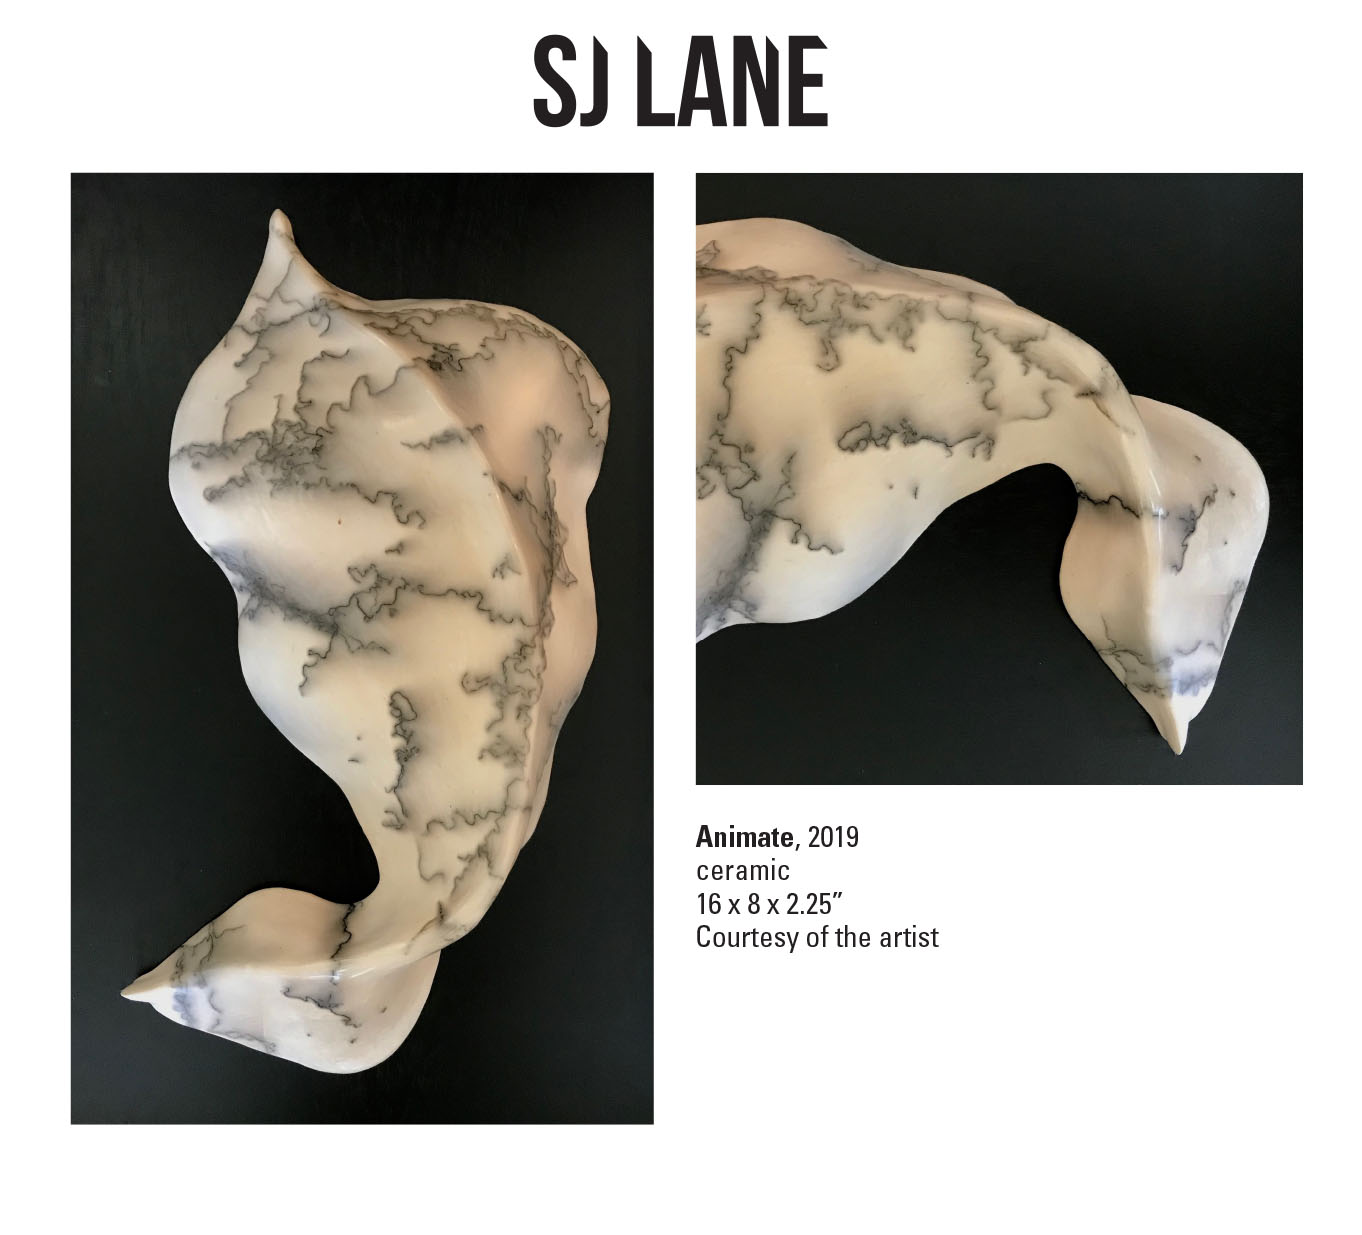 SJ Lane, Animate, 2019. Ceramic. 16 x 8 x 2.25” Courtesy of the artist. A sculpture of a organic looking form with messy black lines over white